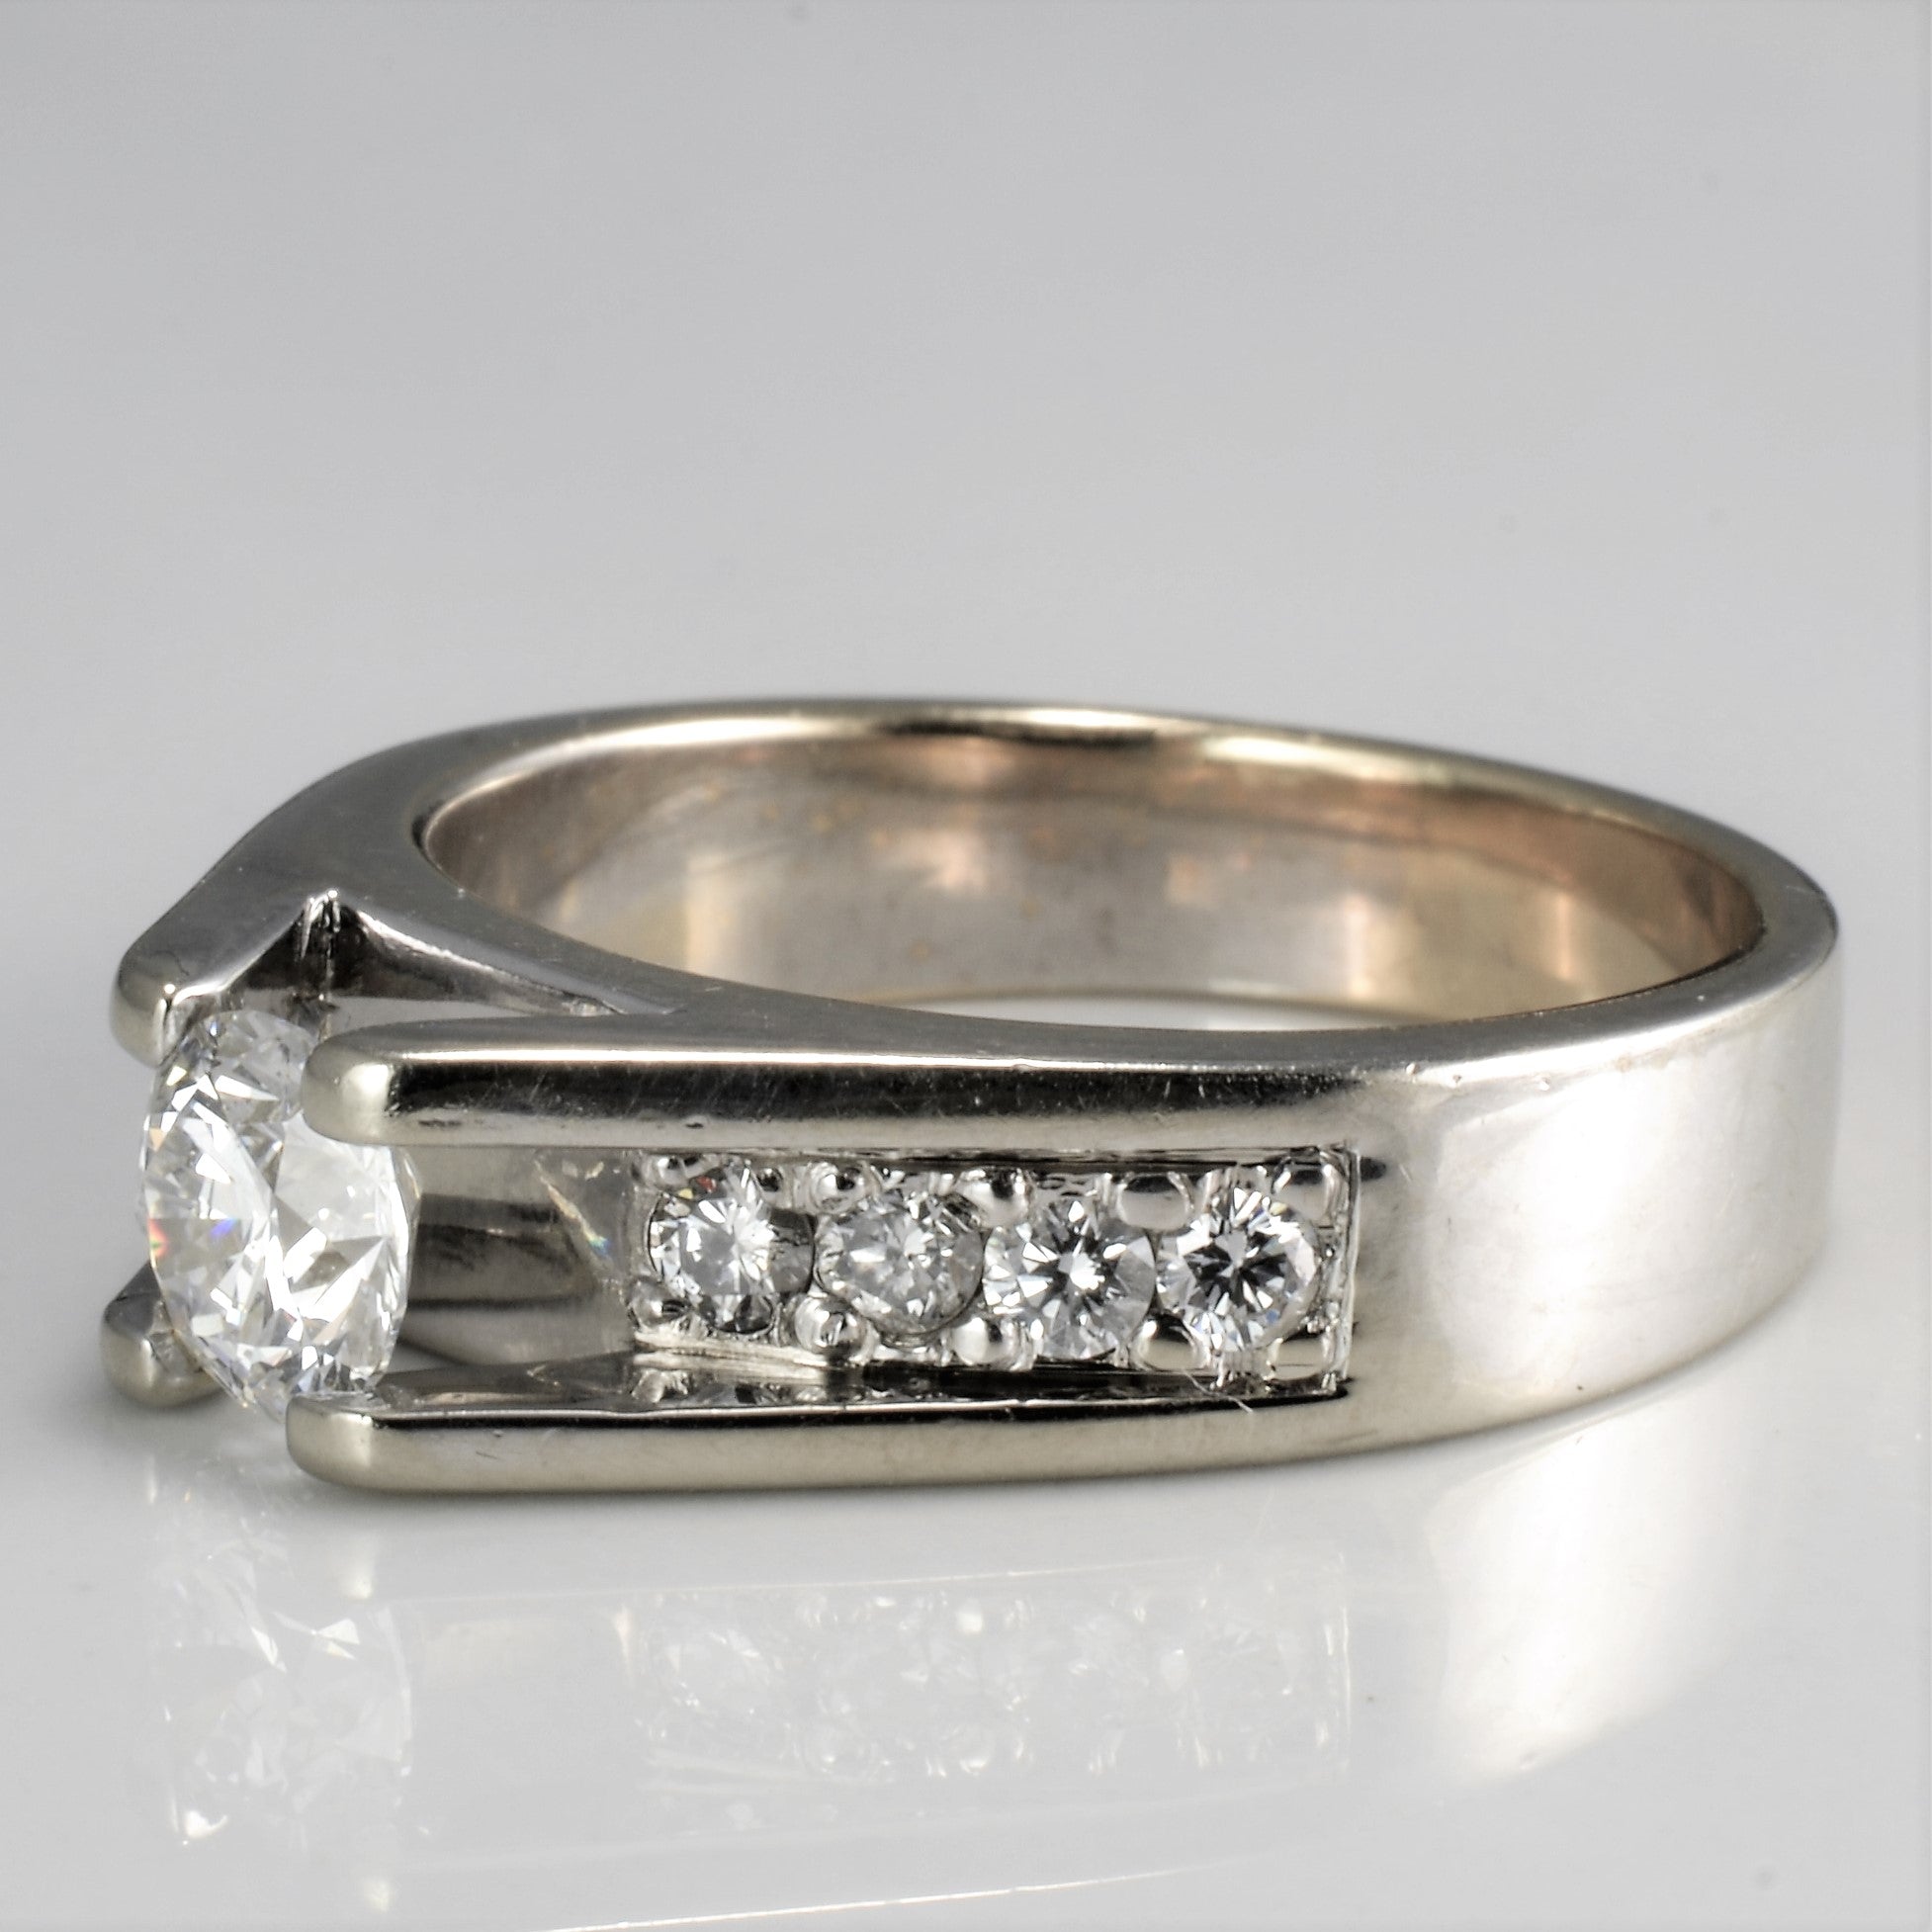 High Set Diamond with Accents Engagement Ring | 0.87 ctw, SZ 7.5 |